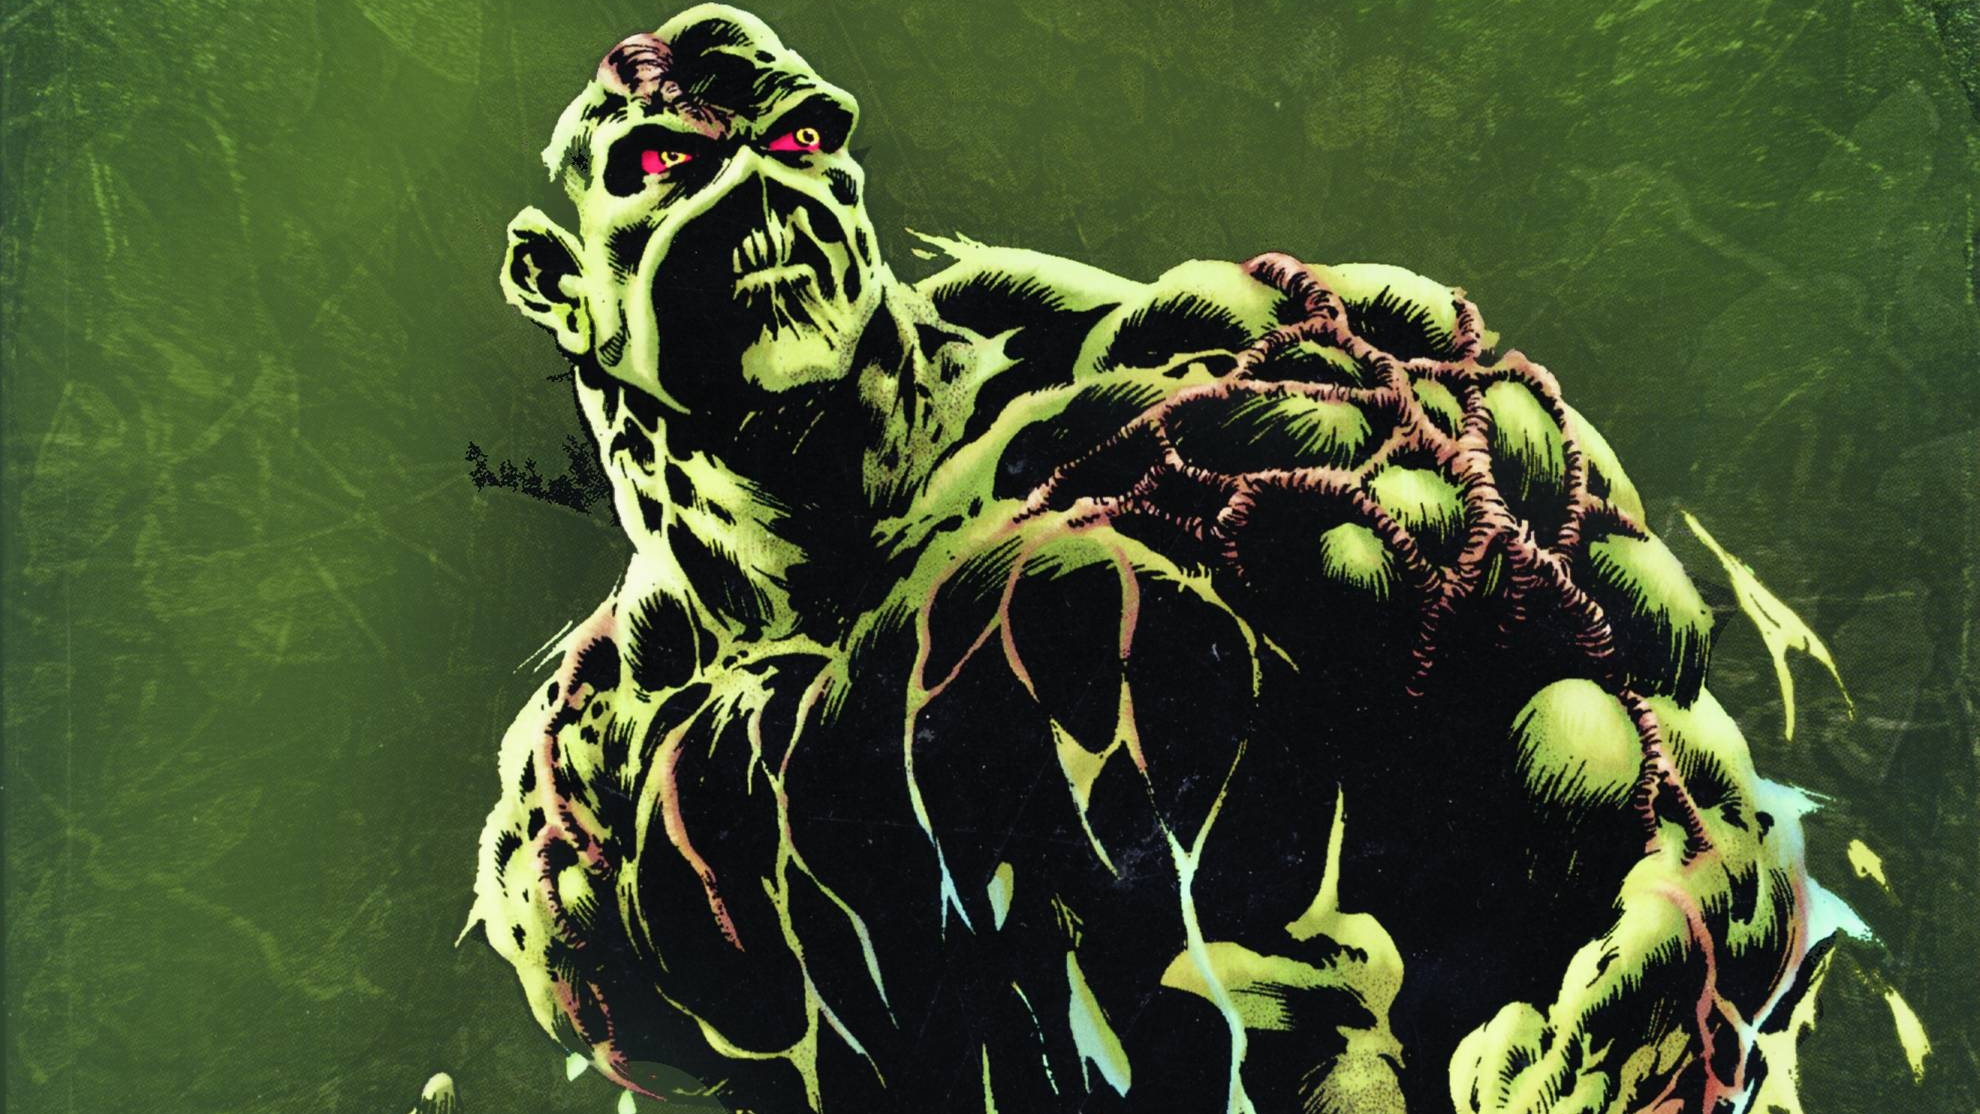 swamp-thing-hd-wallpaper-background-image-1980x1114